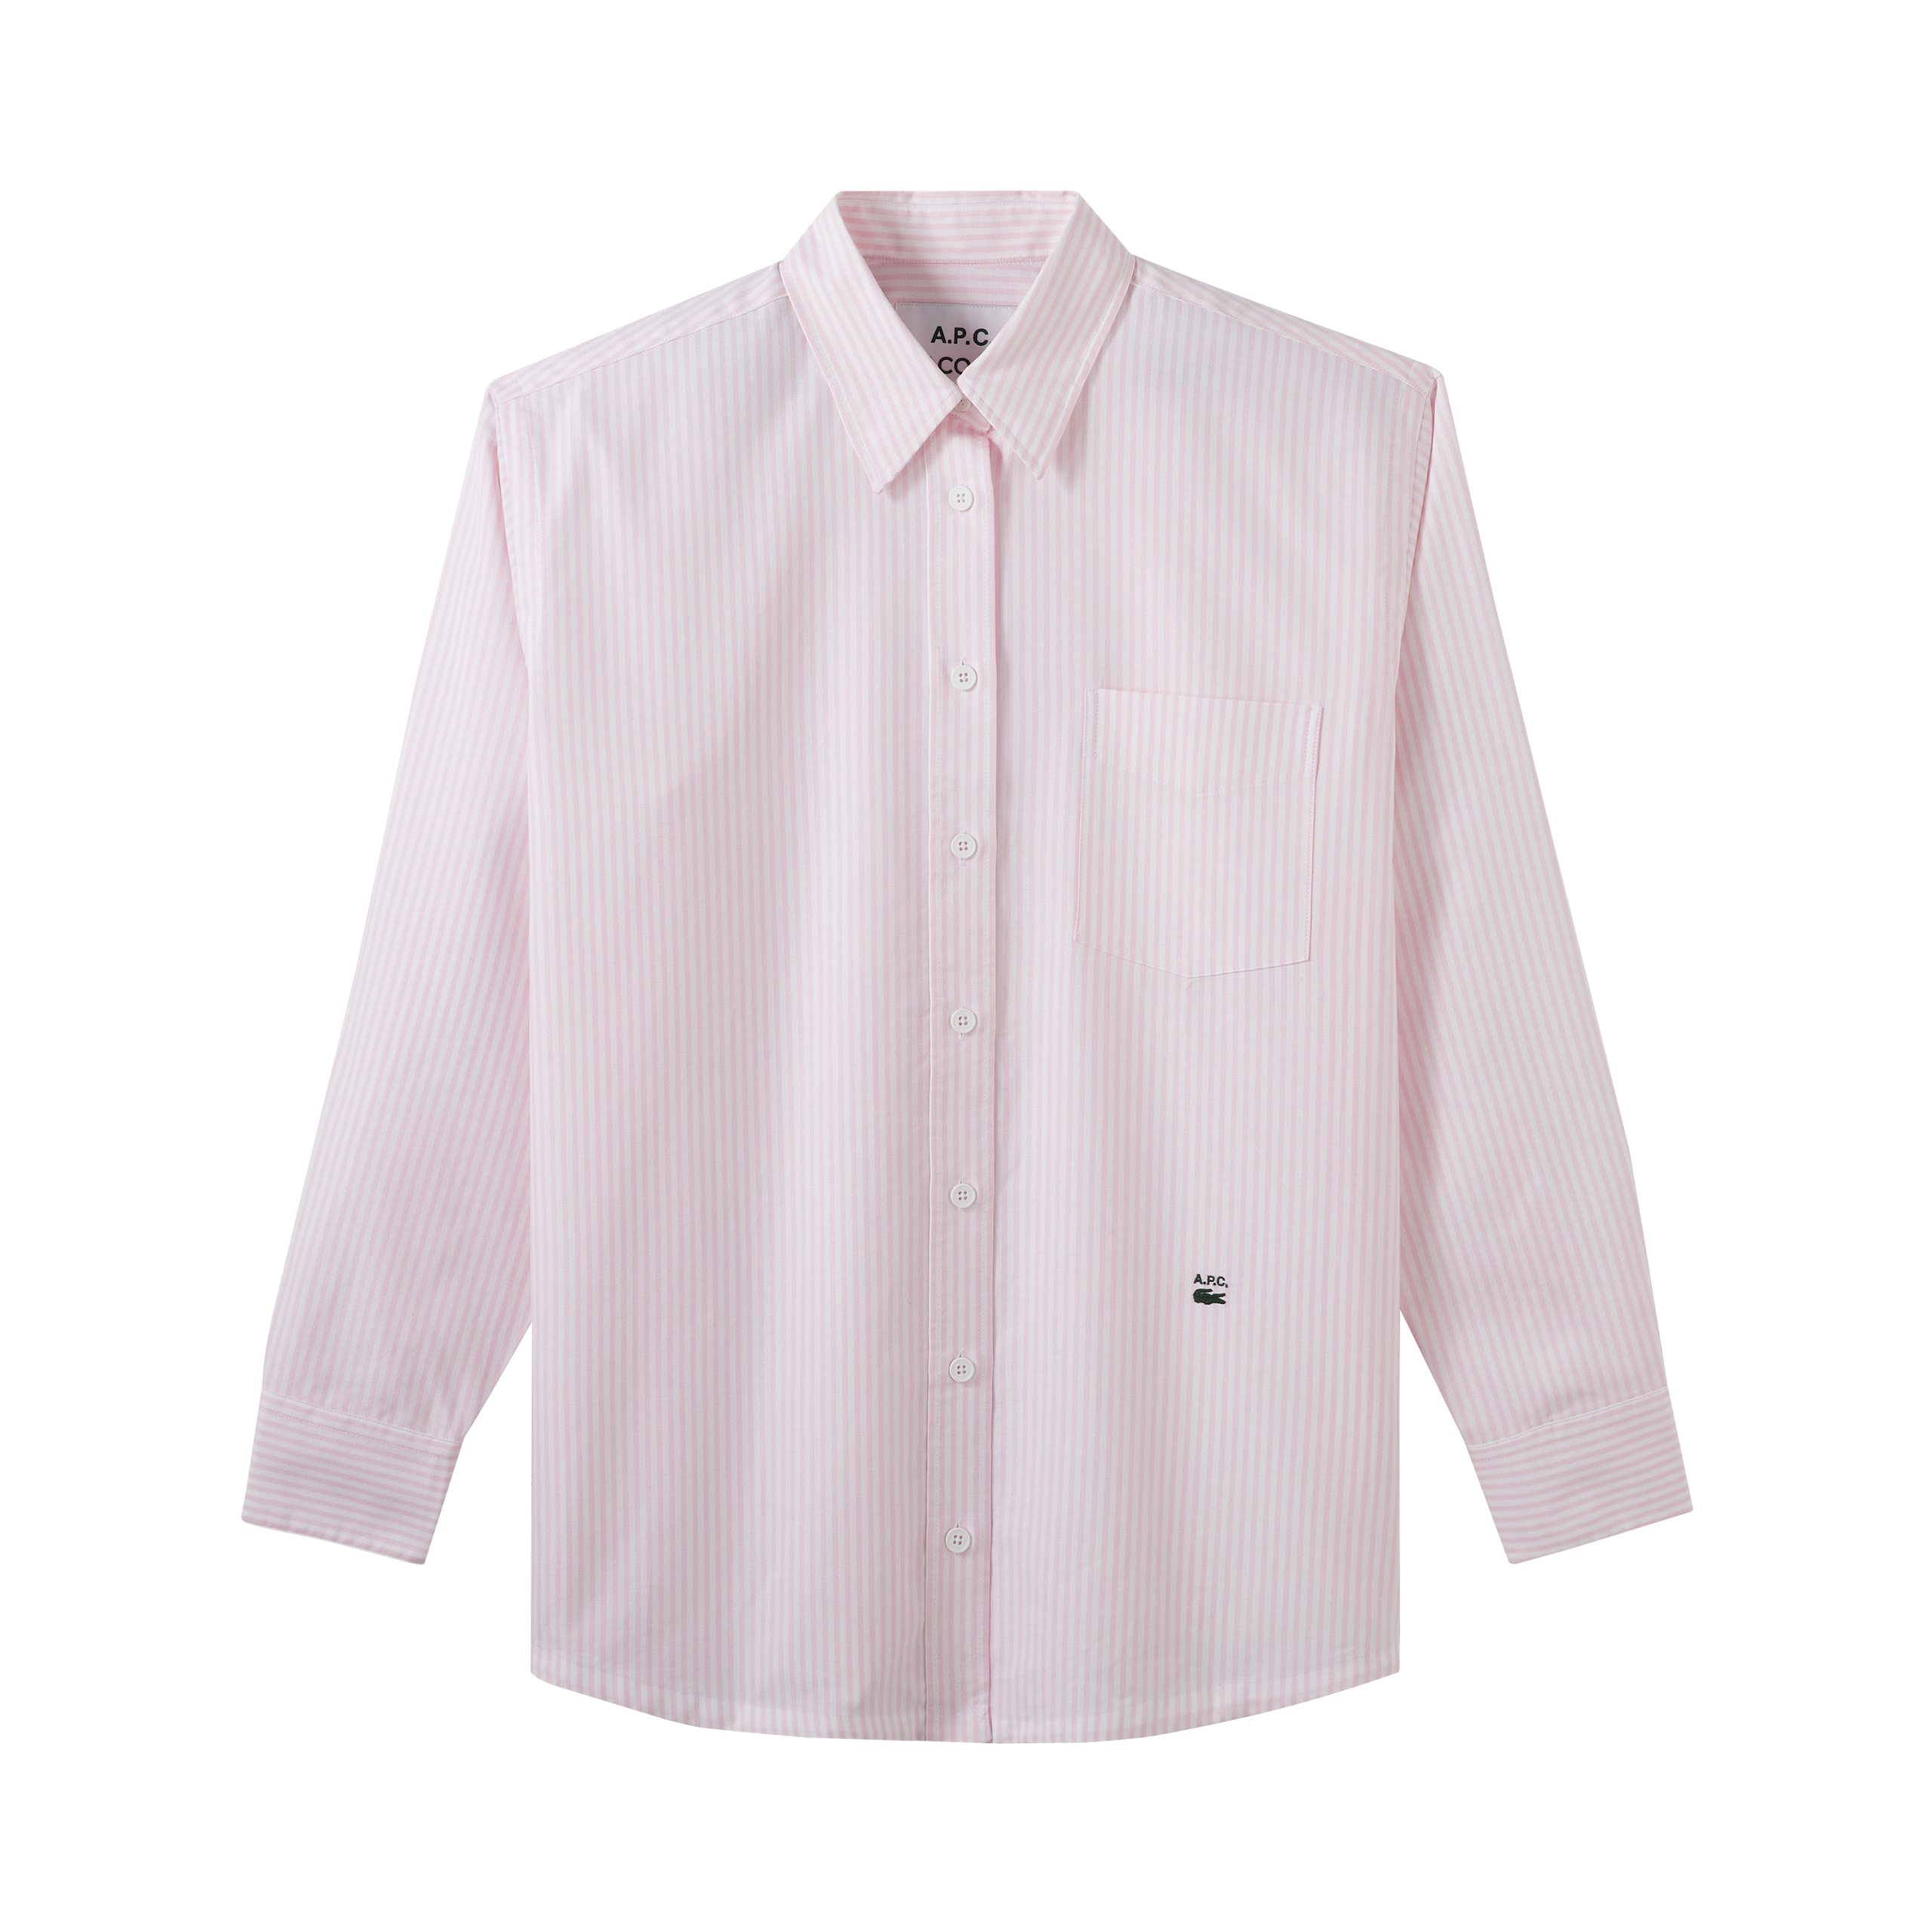 CHEMISE HOMME LACOSTE_ROSE_29700円